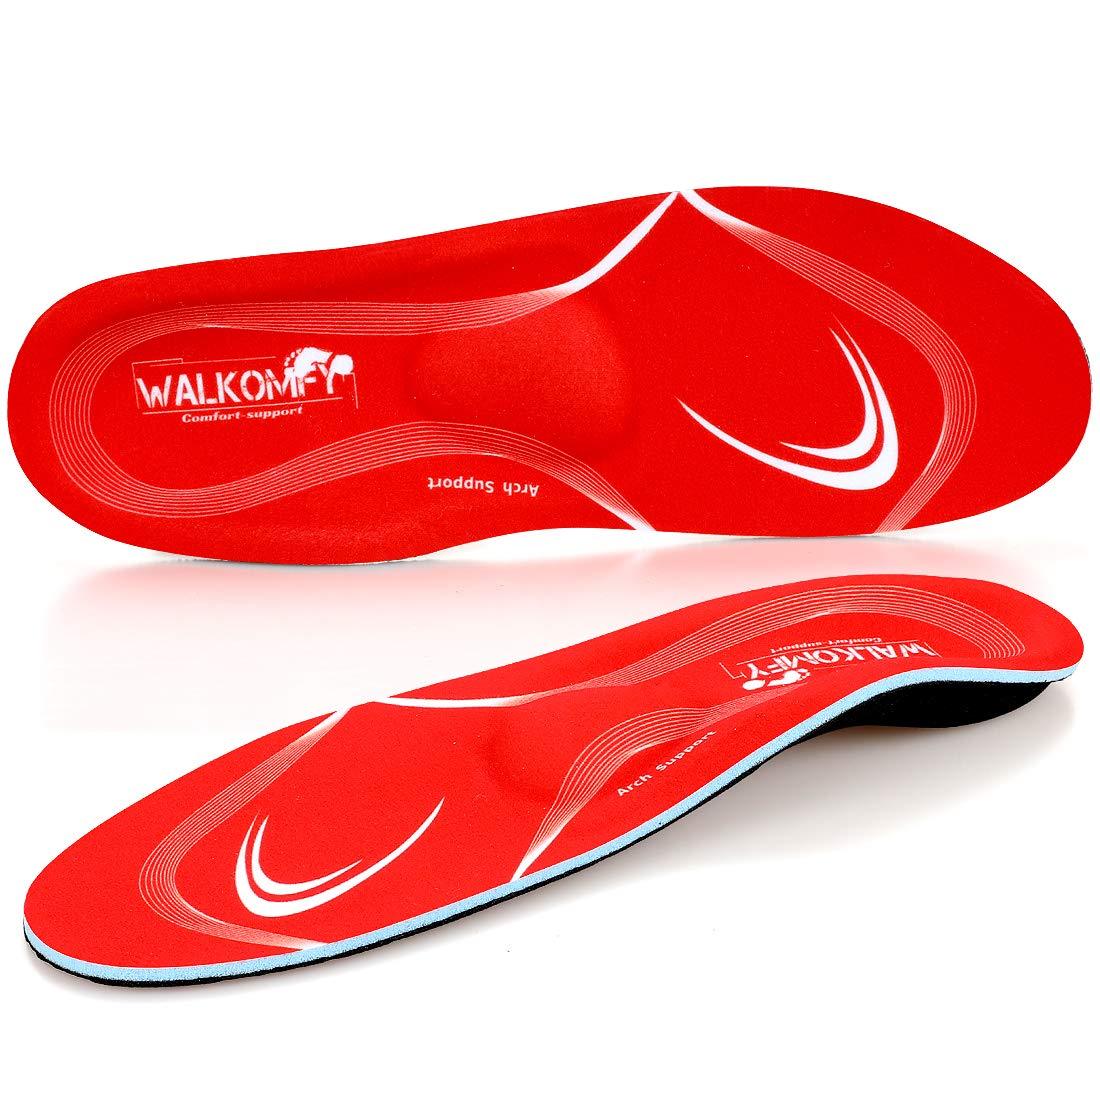 WALKOMFY Pain Relief Orthotics